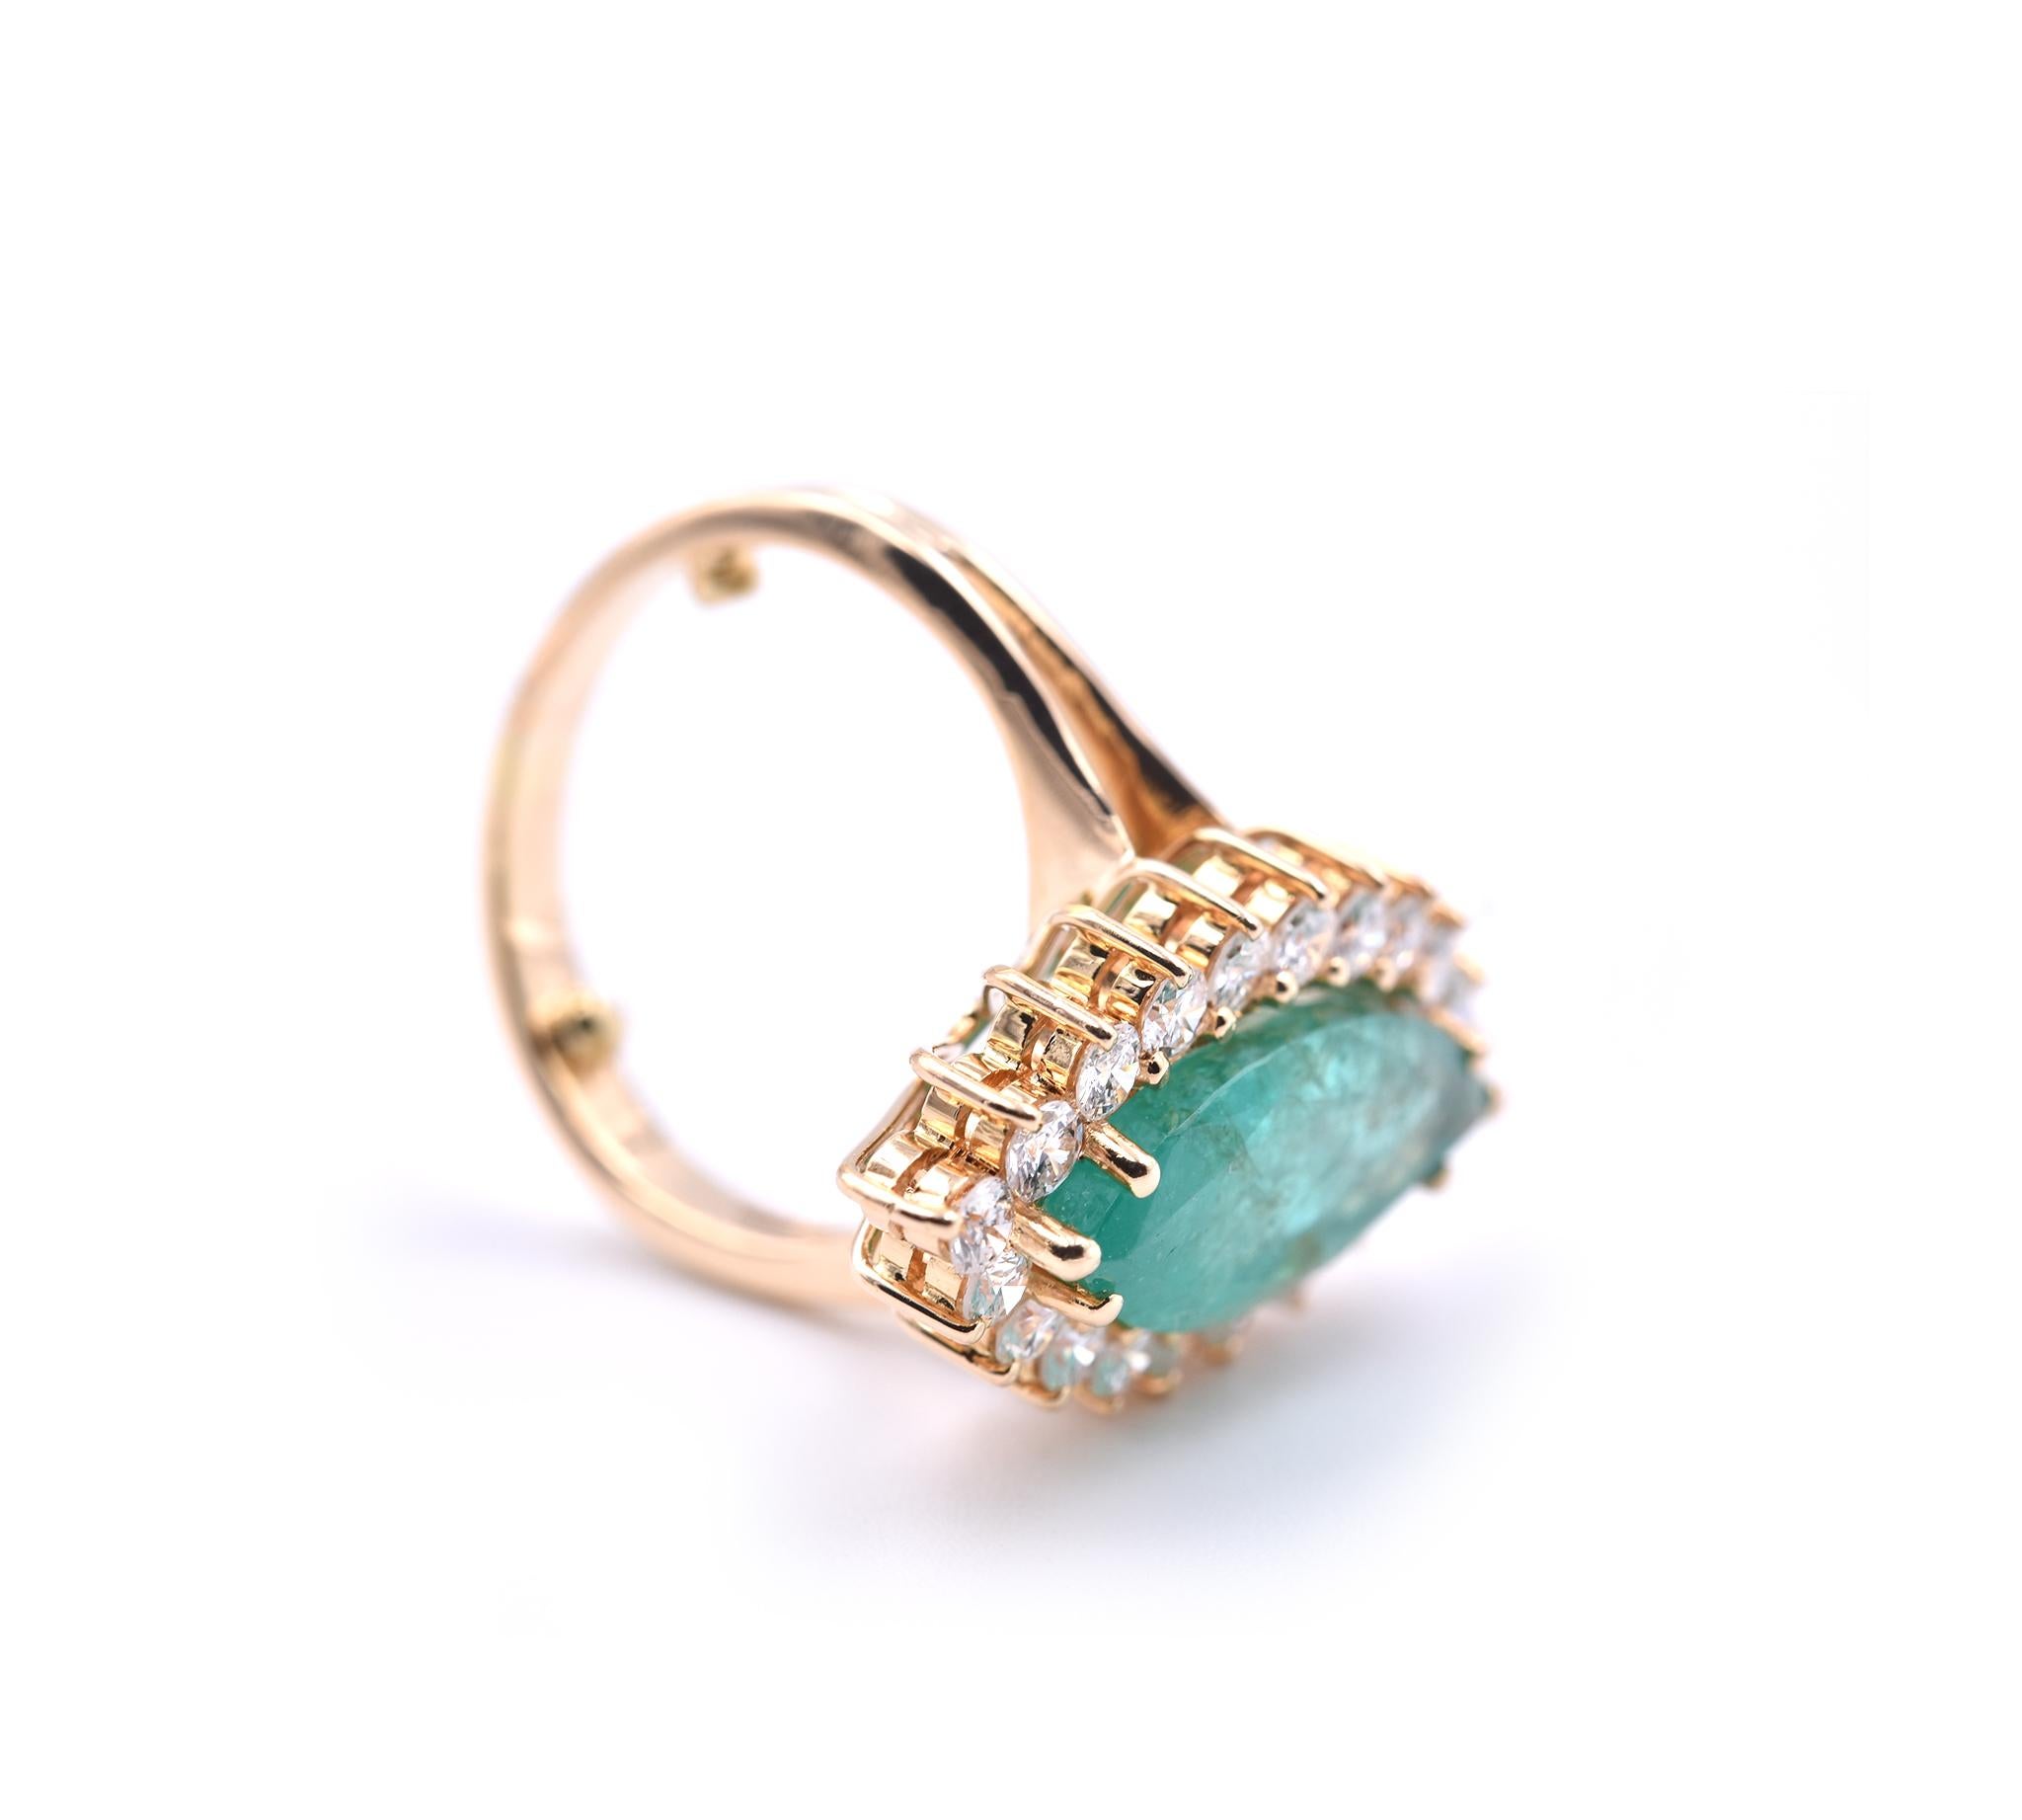 Designer: custom design
Material: 14k yellow gold 
Emerald: 1 marquise cut = 3.00ct
Diamonds: 20 round brilliant cuts = 1.00cttw
Color: G-H
Clarity: SI1
Ring Size: (please allow two additional shipping days for sizing requests)
Dimensions: ring top